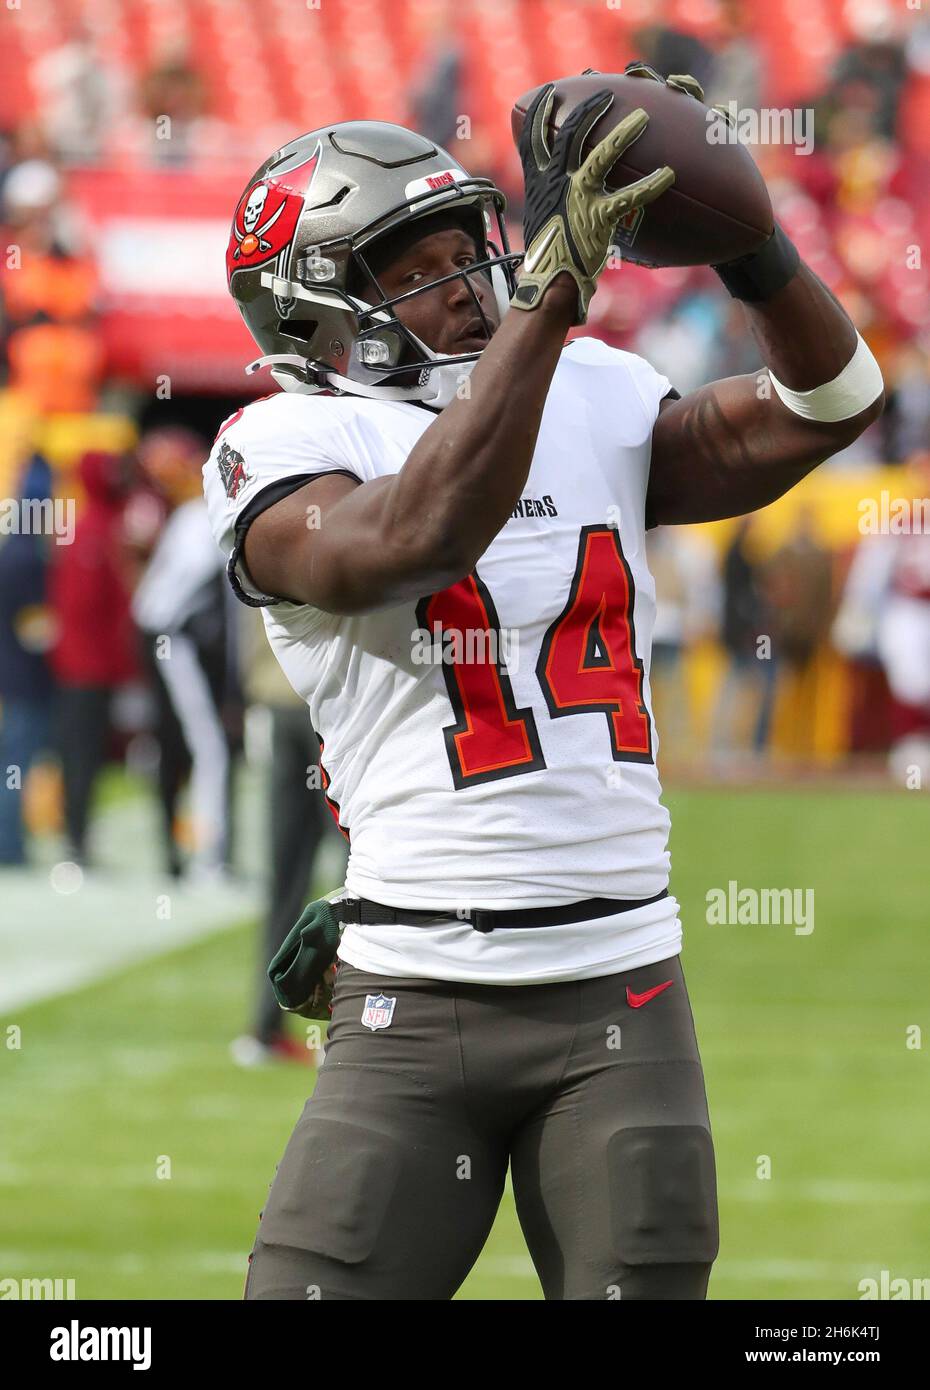 Nov 14, 2021; Landover, MD USA; Tampa Bay Buccaneers wide receiver Chris Godwin (14) catches a pass before an NFL game at FedEx Field